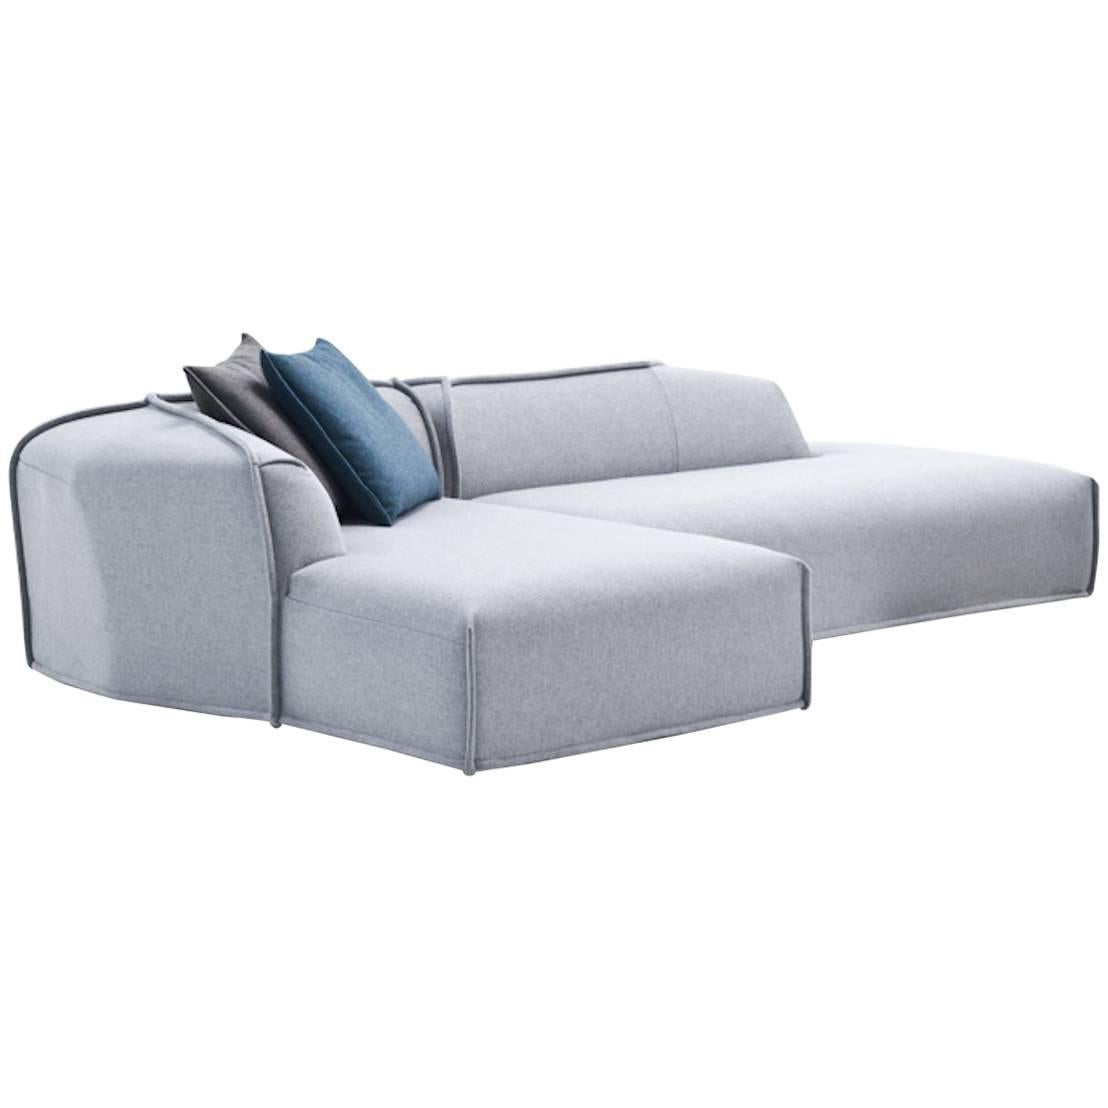 M.A.S.S.A.S Modular Sofa by Patricia Urquiola for Moroso in Fabric im Angebot